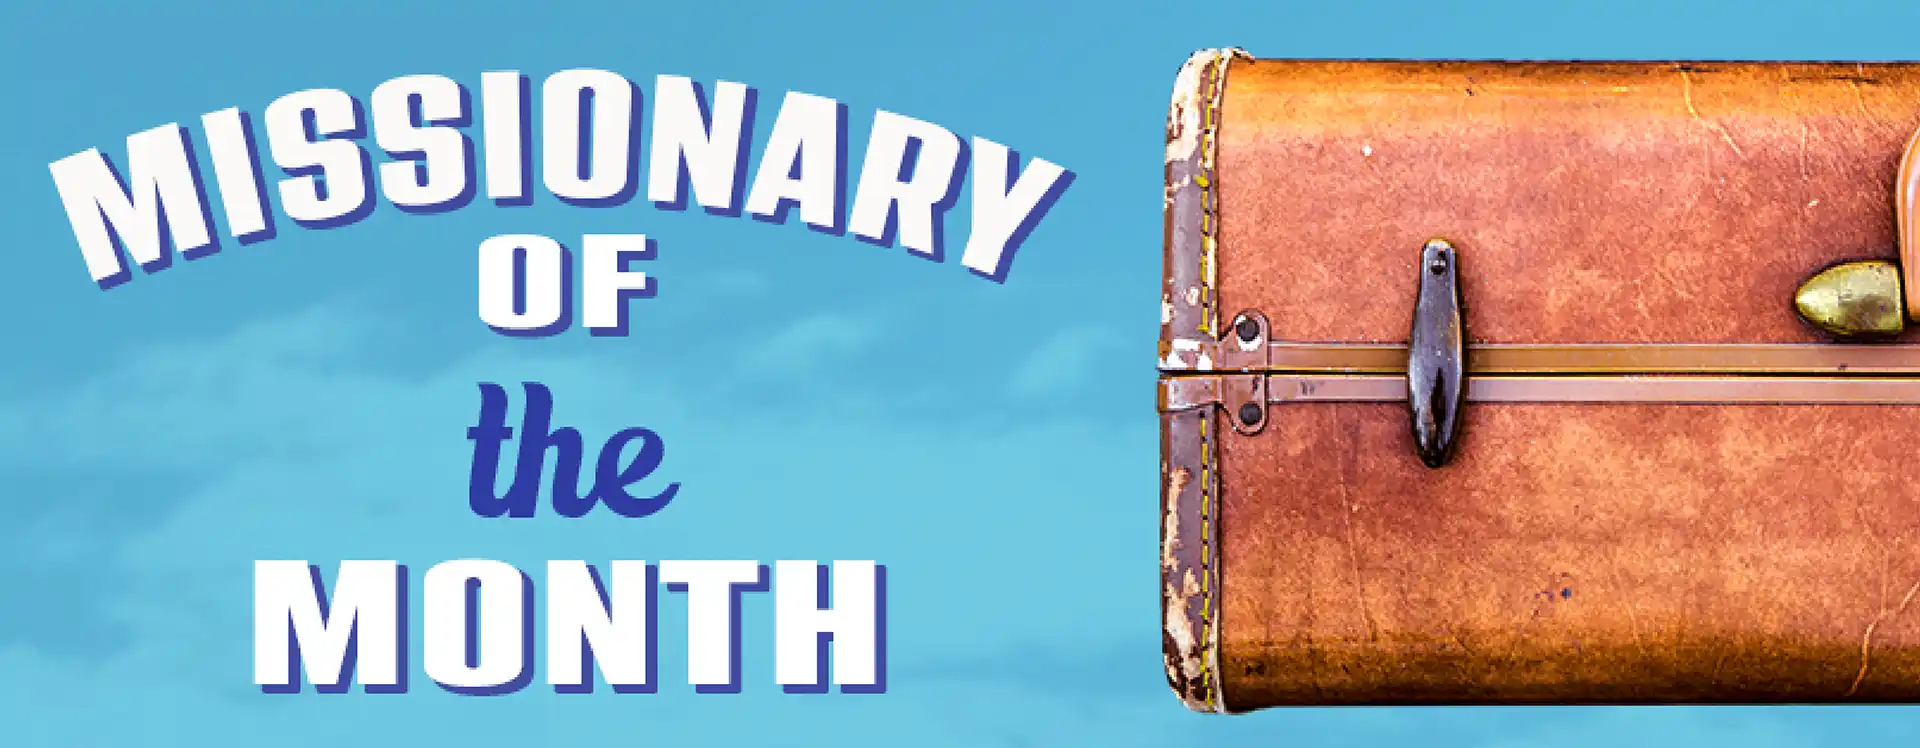 CCBC Missionary of the Month